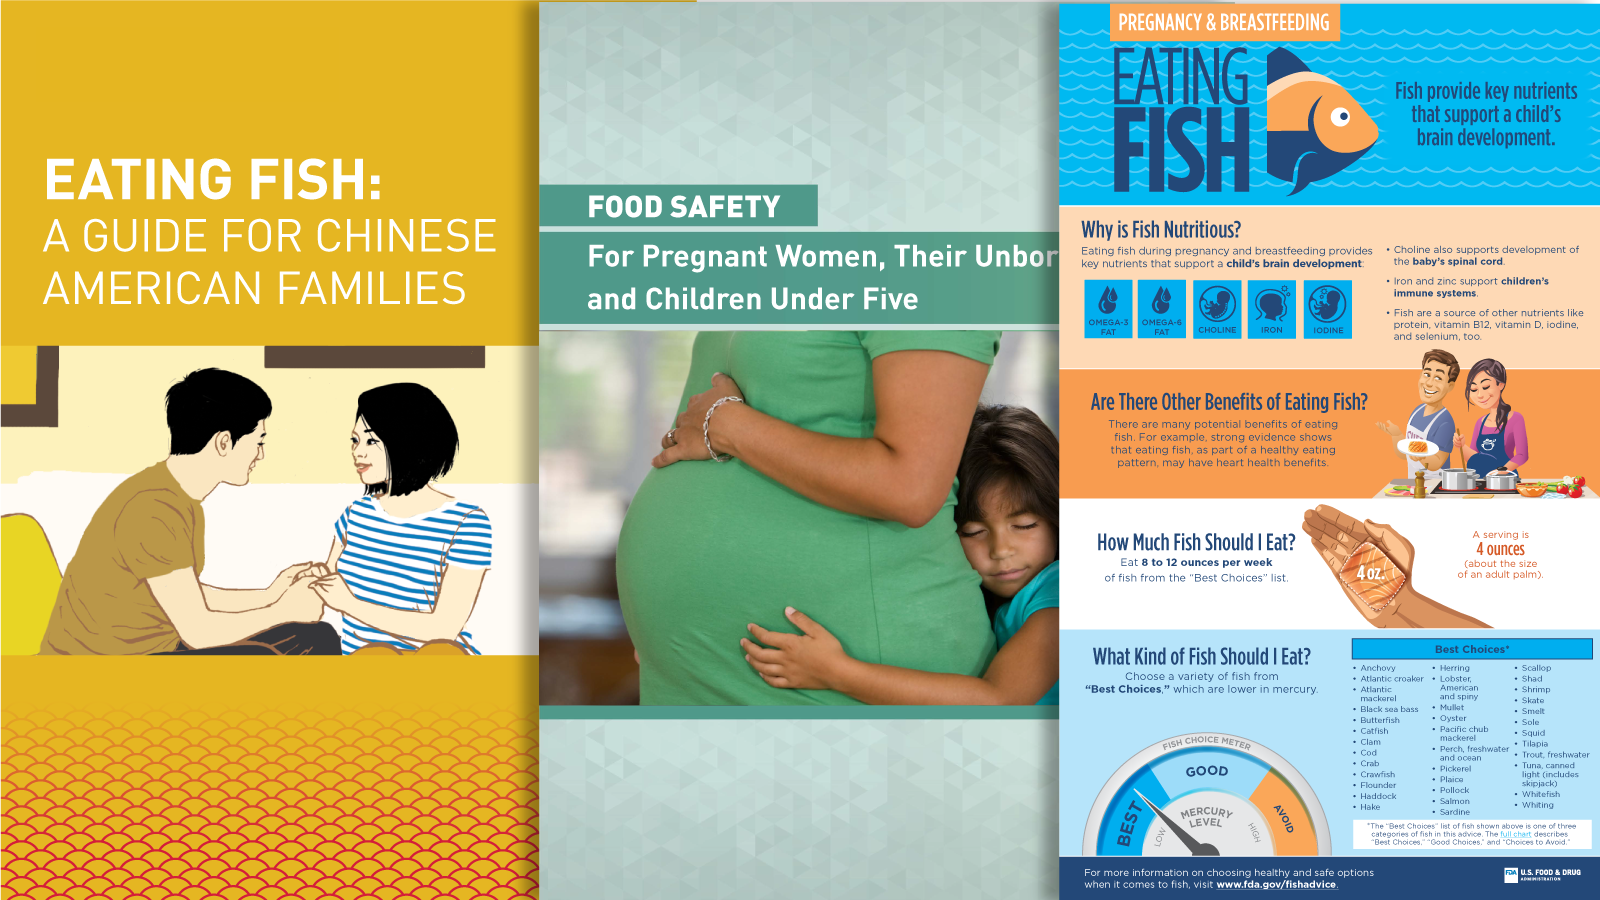 Resources for Consumers and Educators on the Advice About Eating Fish